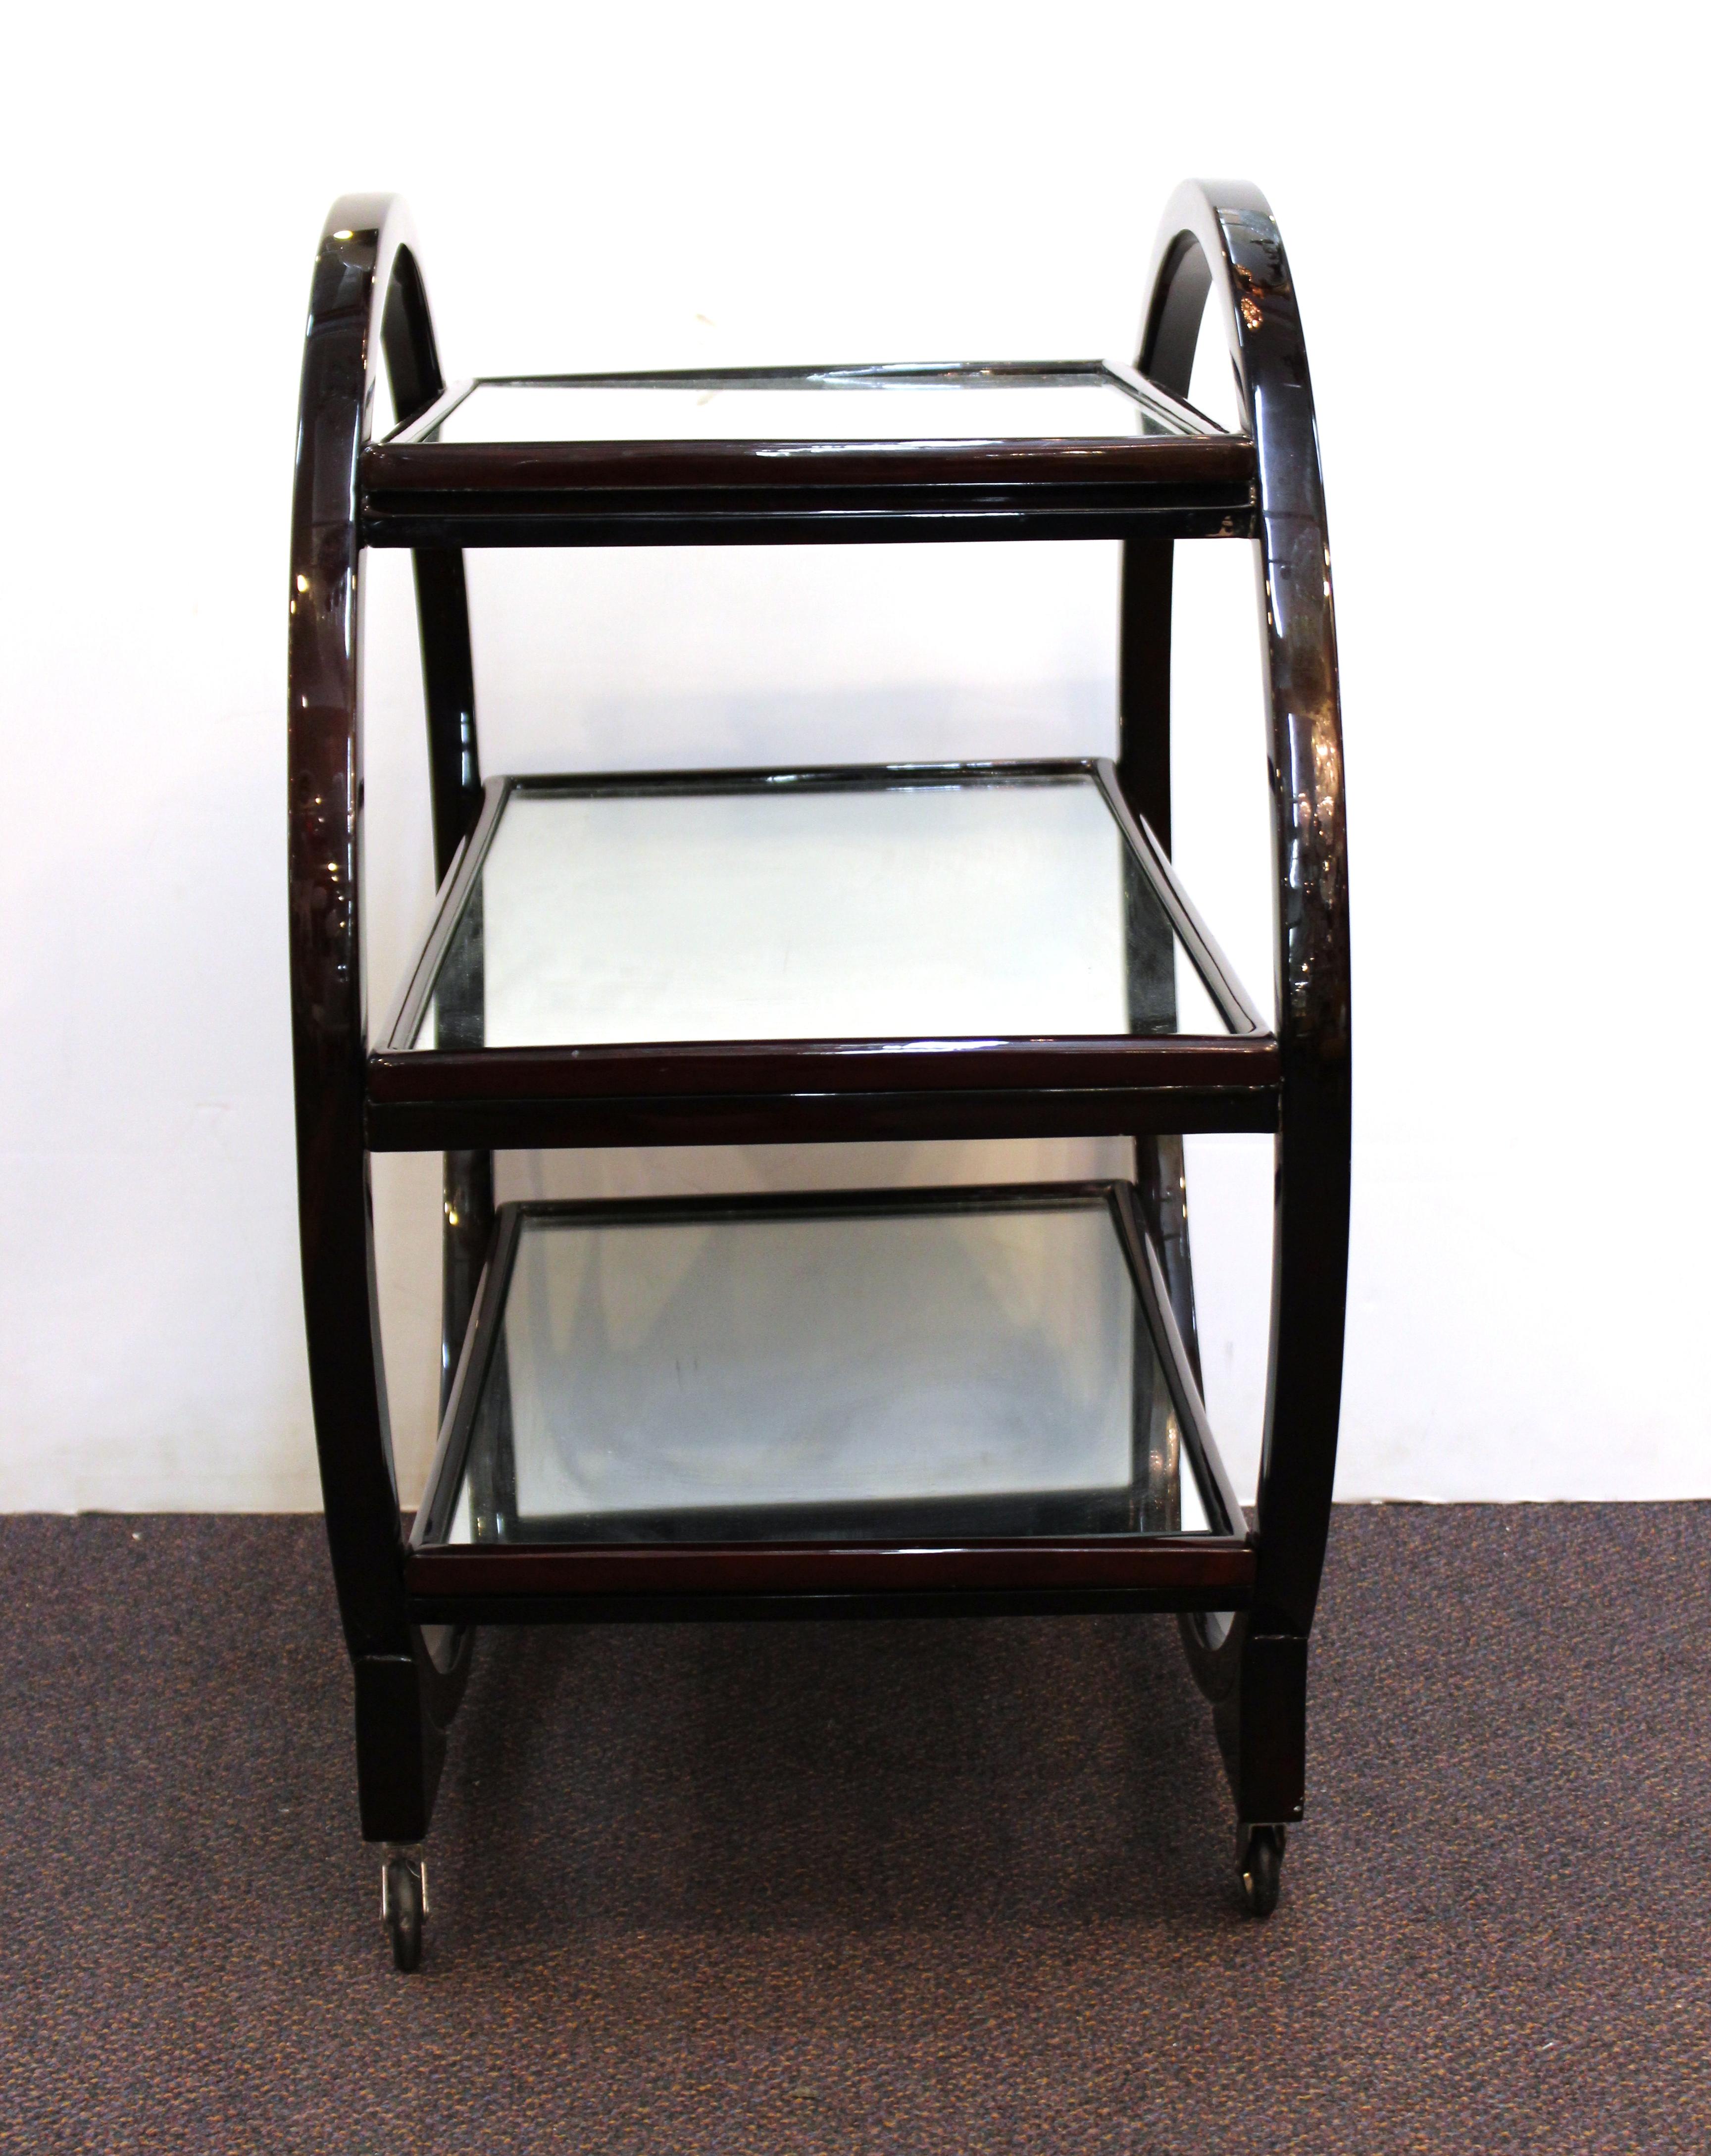 Mid-20th Century English Art Deco Bar Cart in Circular Shape with Three Mirrored Levels